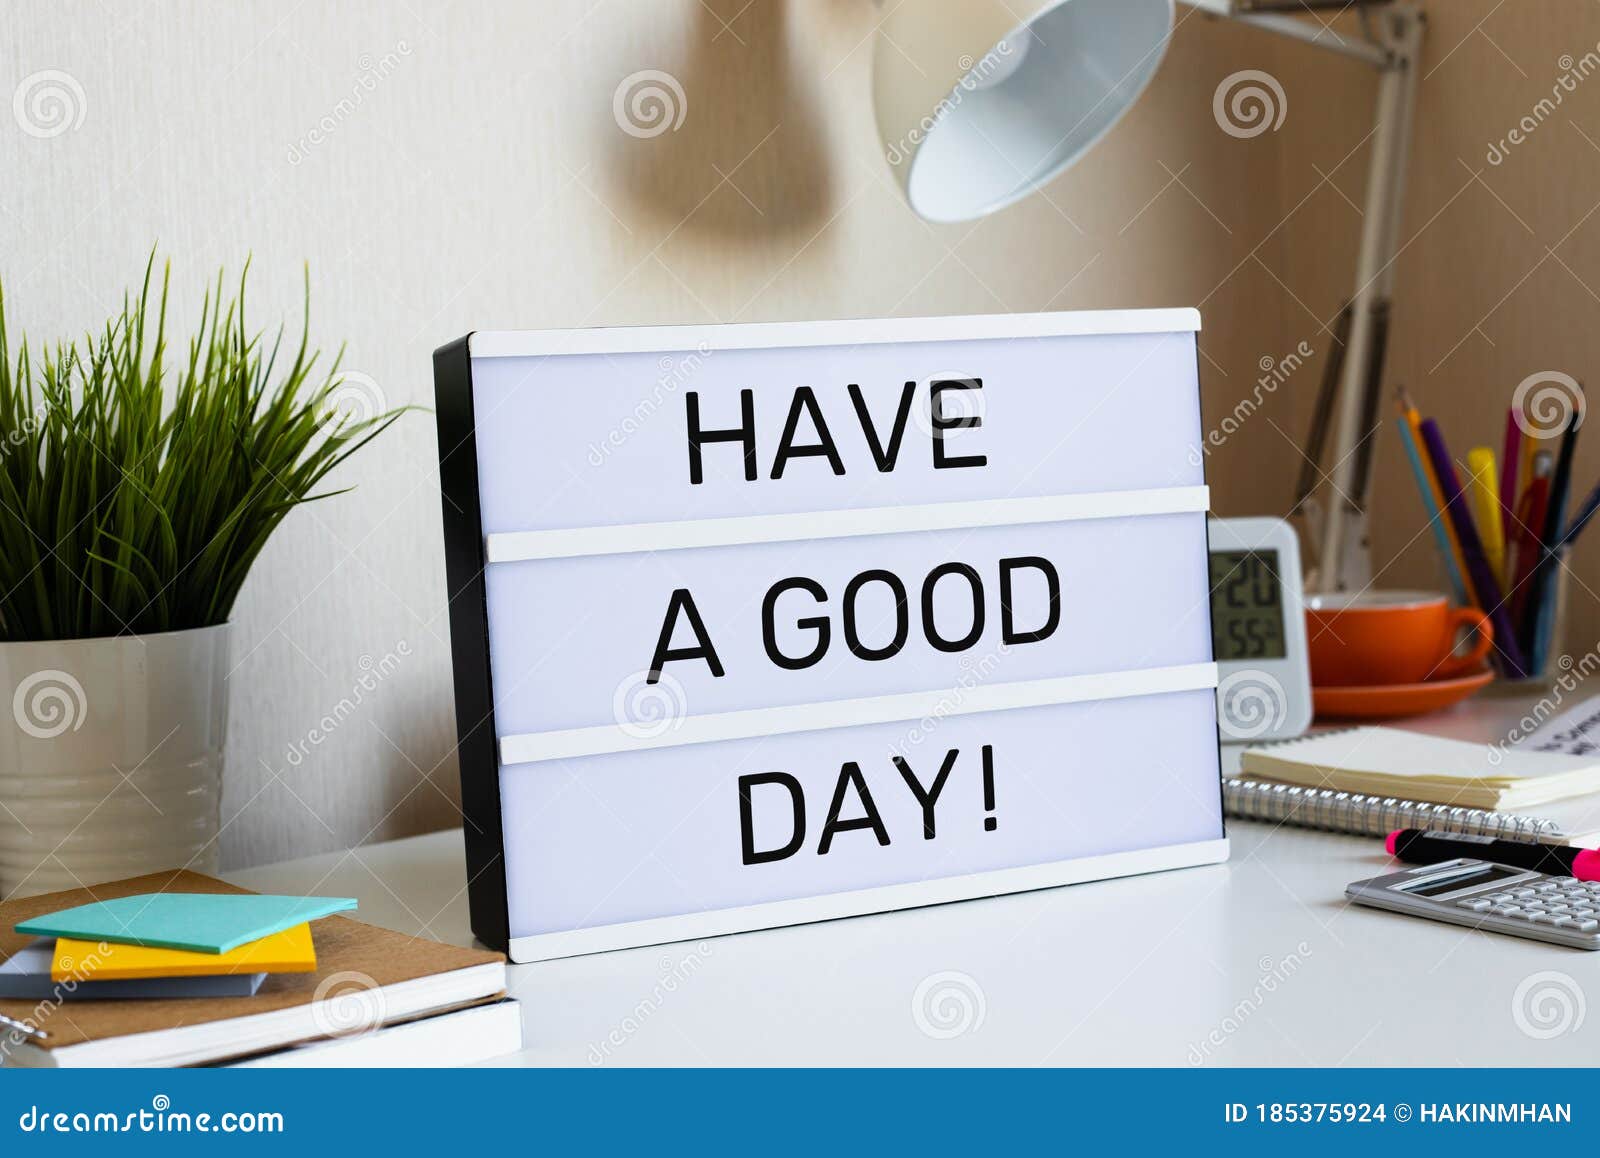 Have a Good Day with Job Concepts.motivation of Work Stock Photo ...